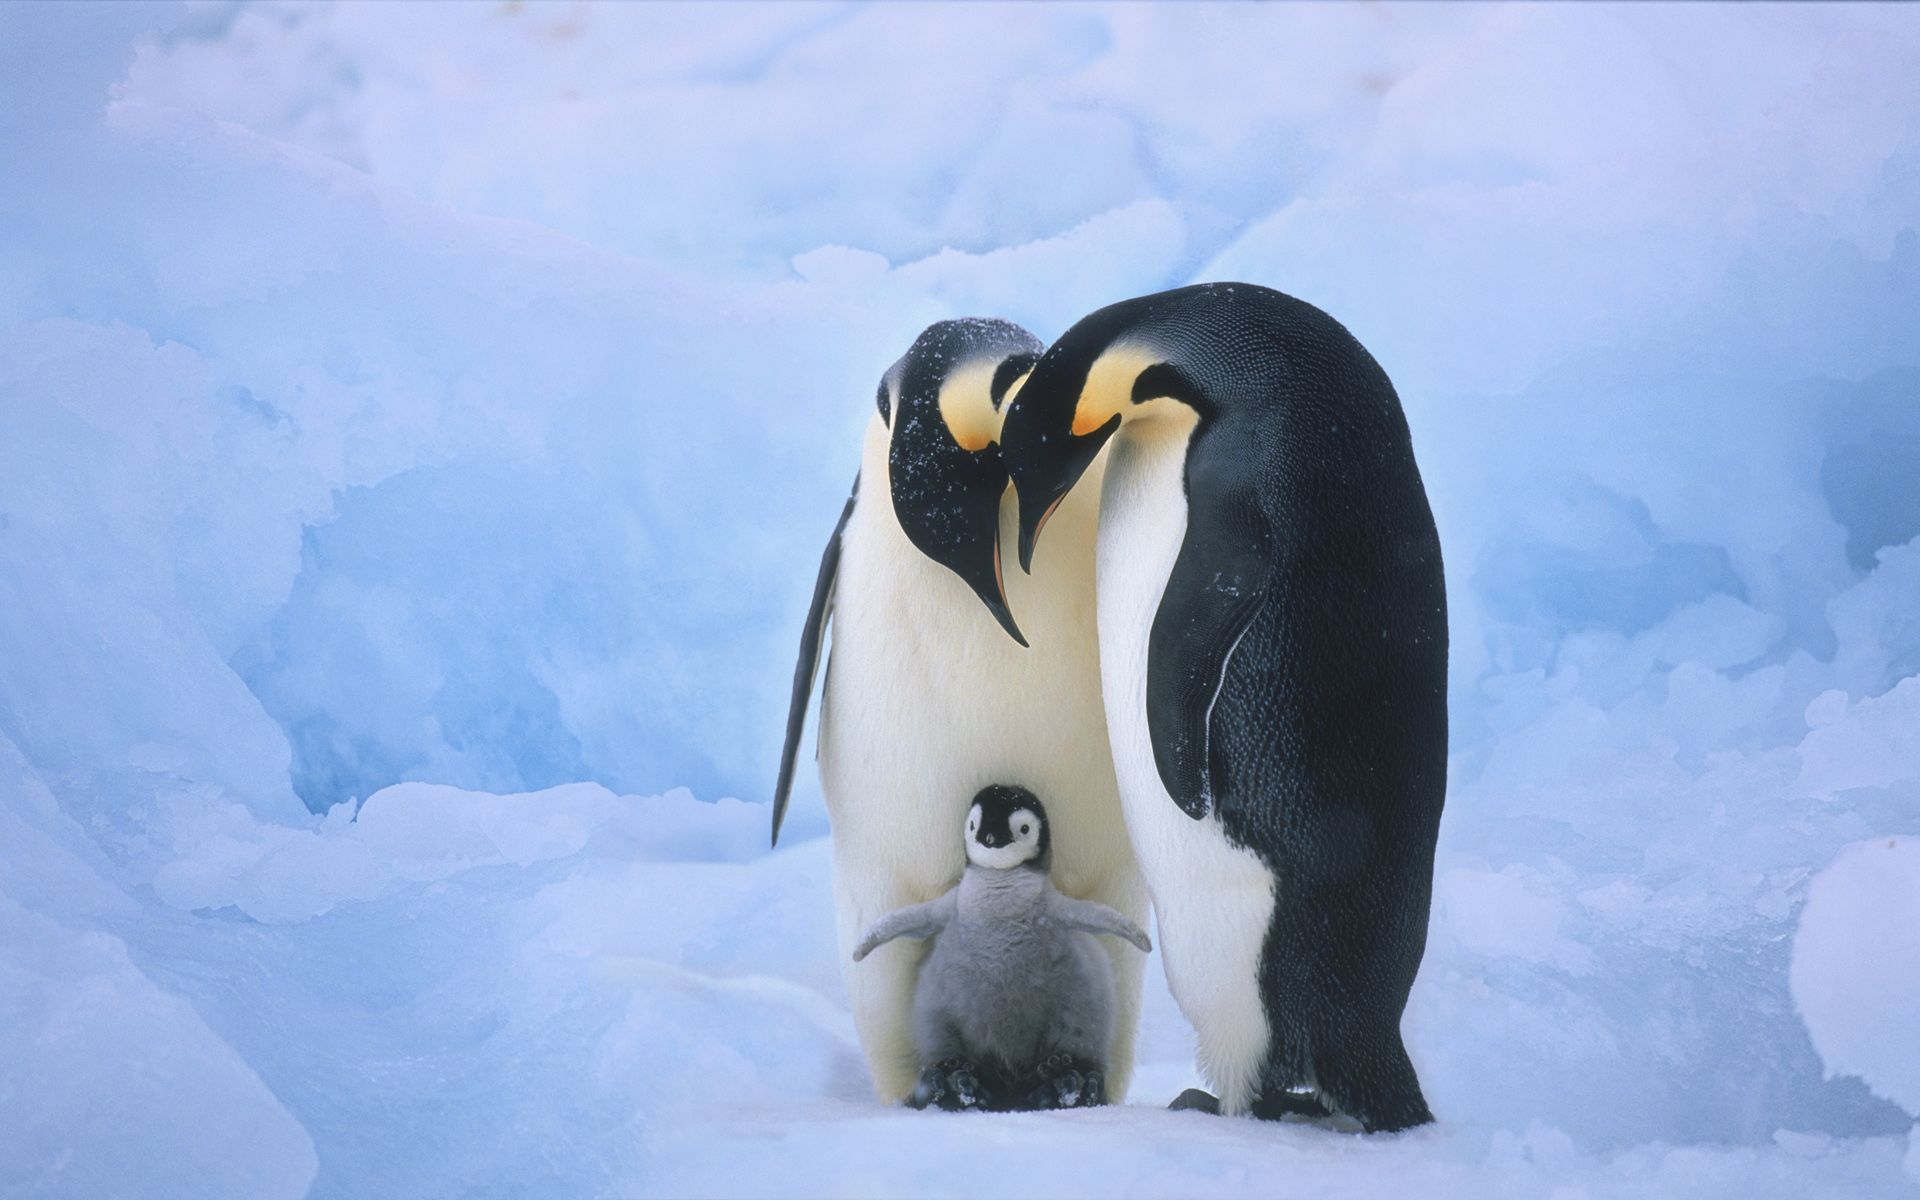 Cute Baby Penguins This Shows Familyhood and Closeness